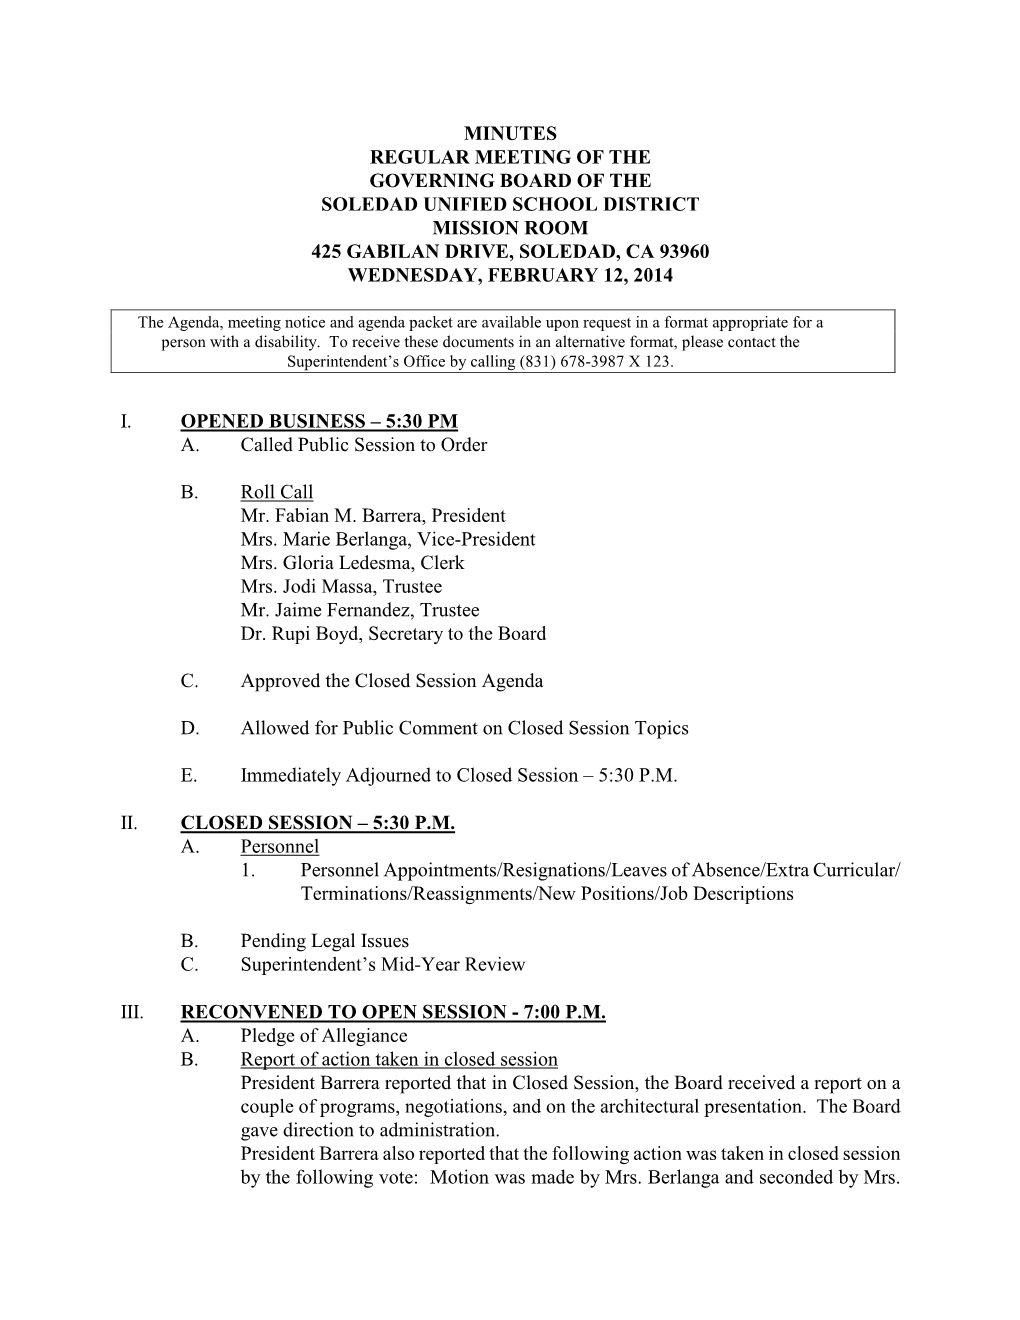 Minutes Regular Meeting of the Governing Board of the Soledad Unified School District Mission Room 425 Gabilan Drive, Soledad, Ca 93960 Wednesday, February 12, 2014